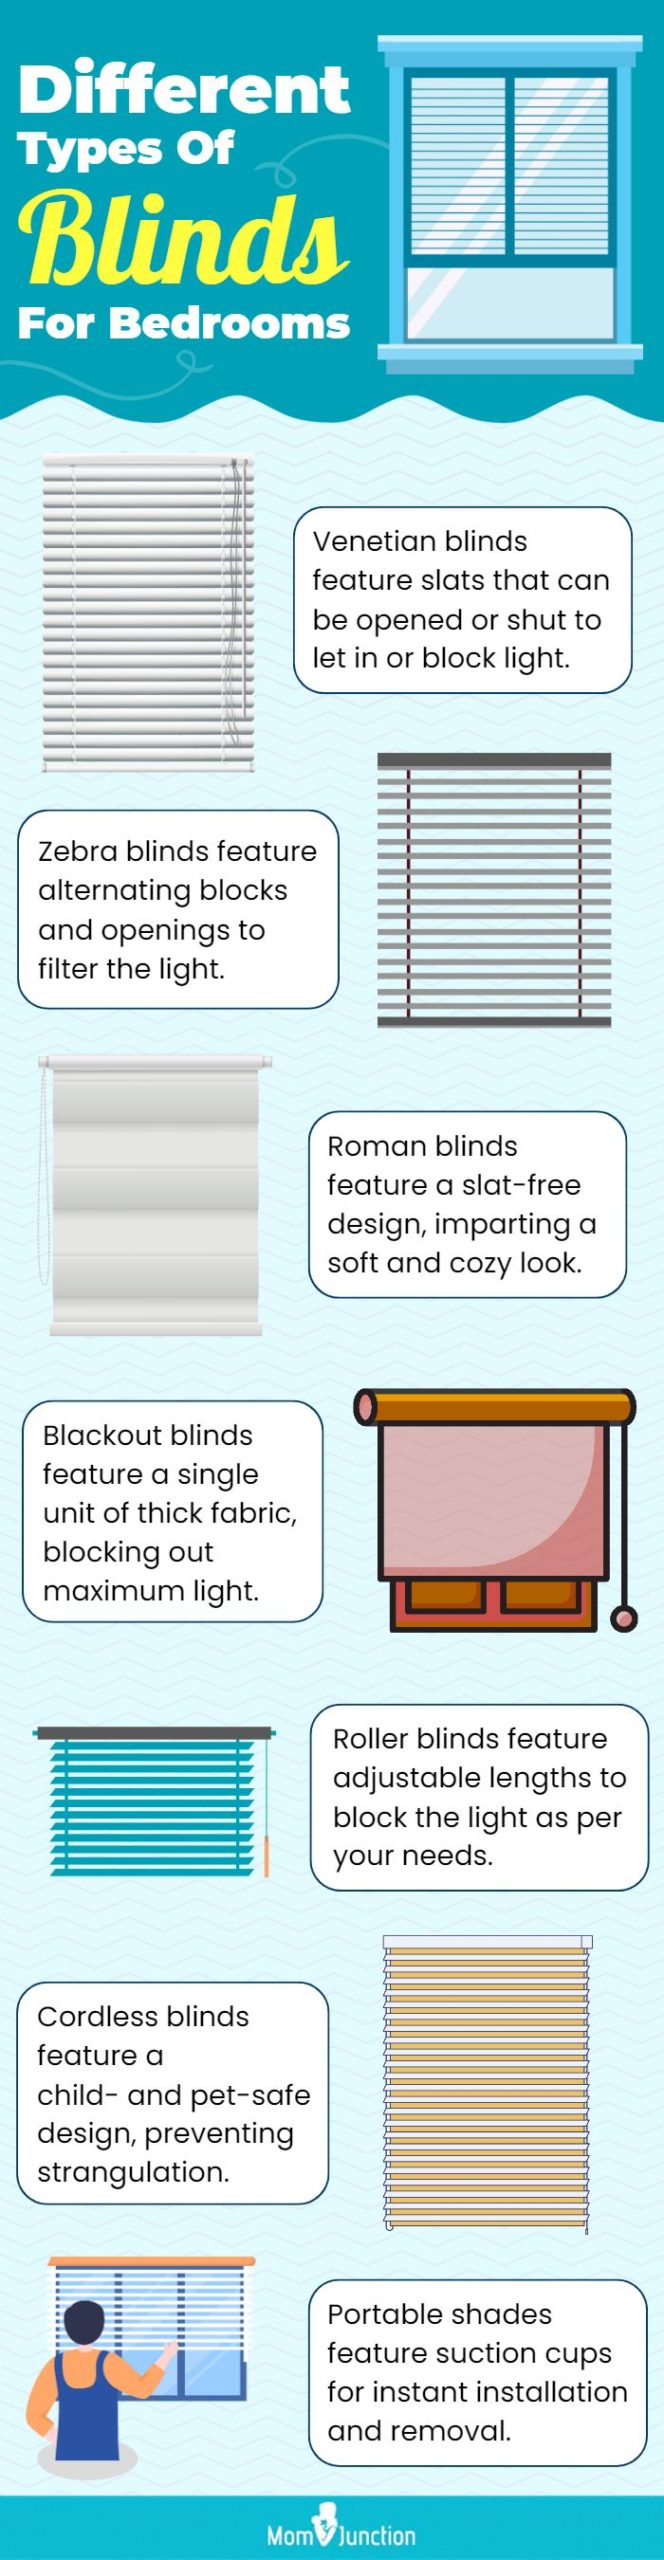 Different Types Of Blinds For Bedrooms (infographic)